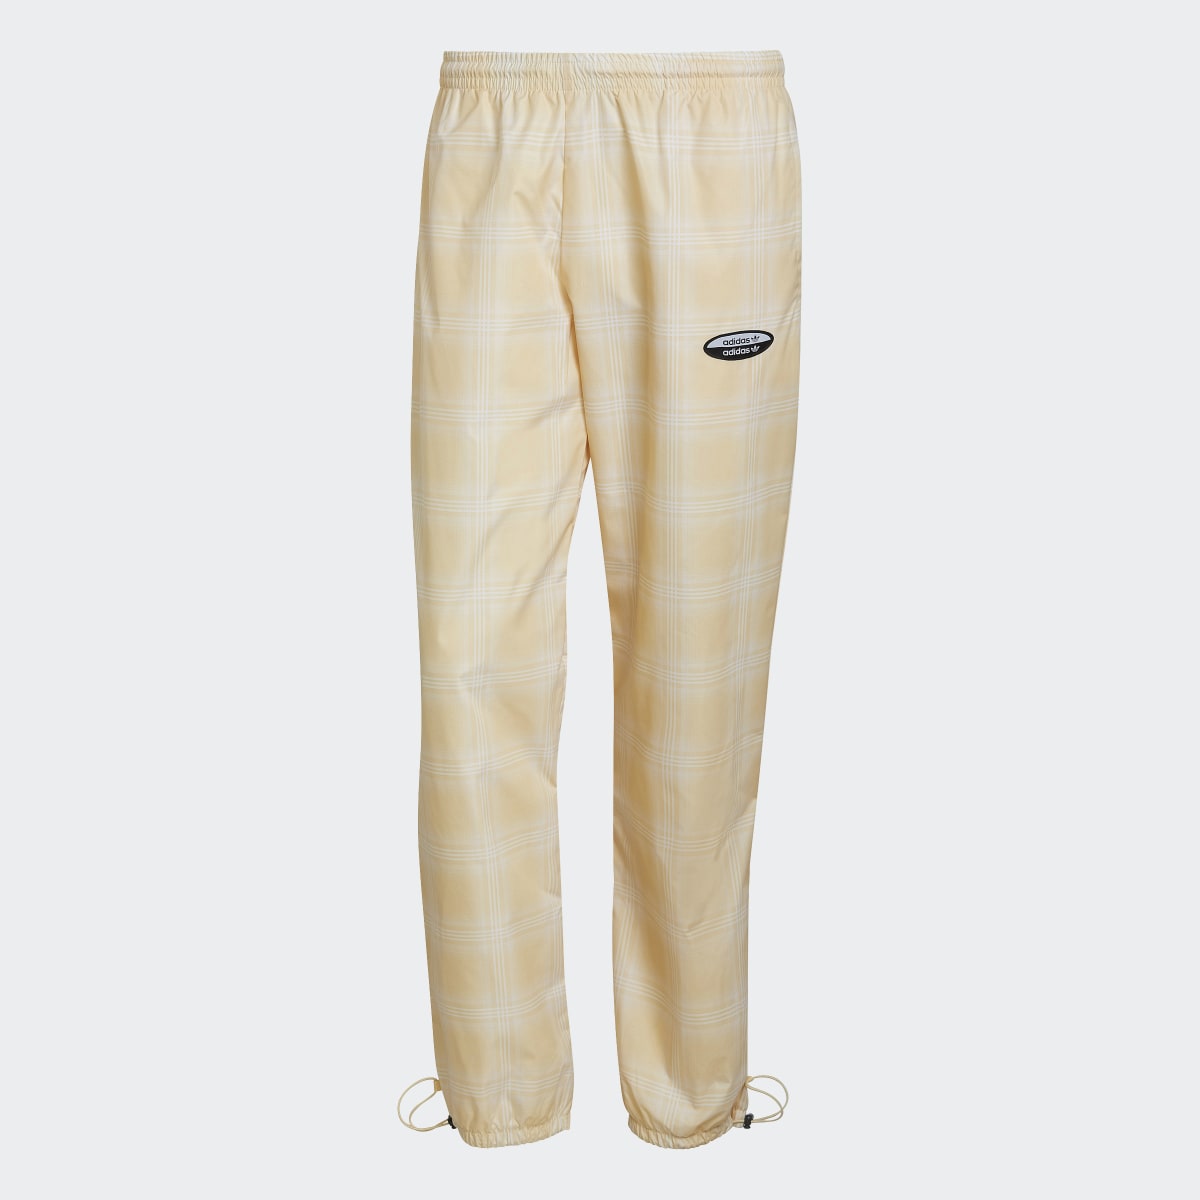 Adidas R.Y.V. Woven Tracksuit Bottoms. 4